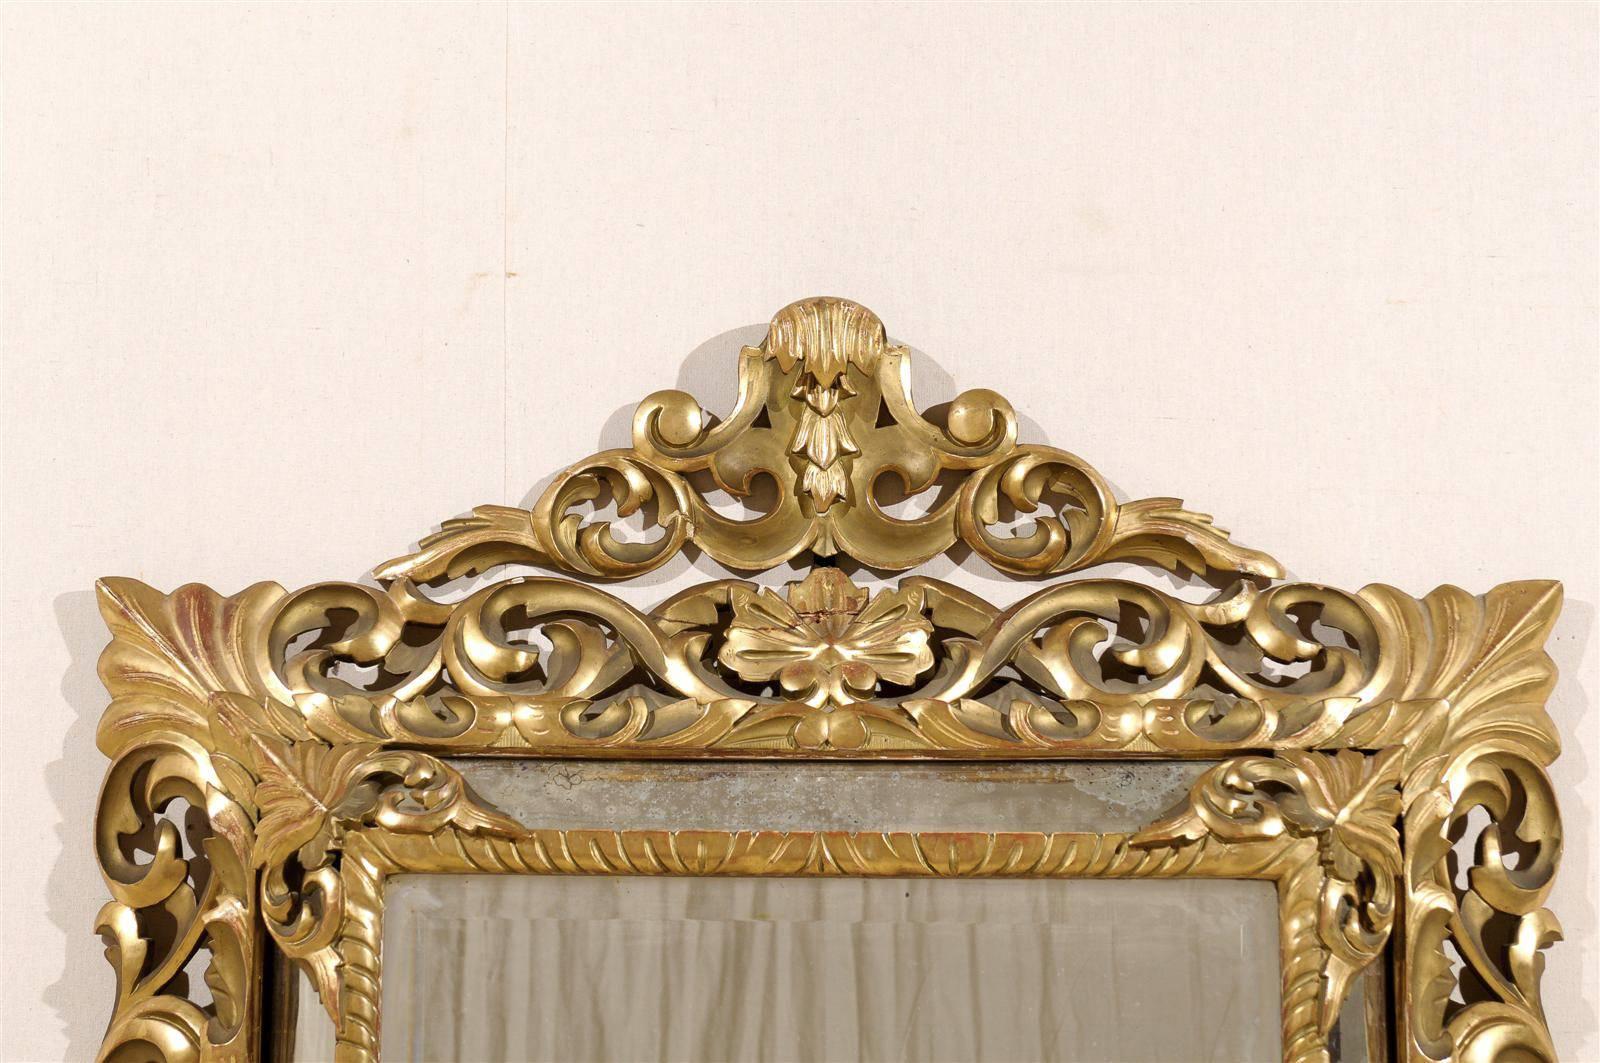 An Italian 19th Century Gilt Wood Mirror with Ornate Foliage Decor, Gold Color For Sale 3